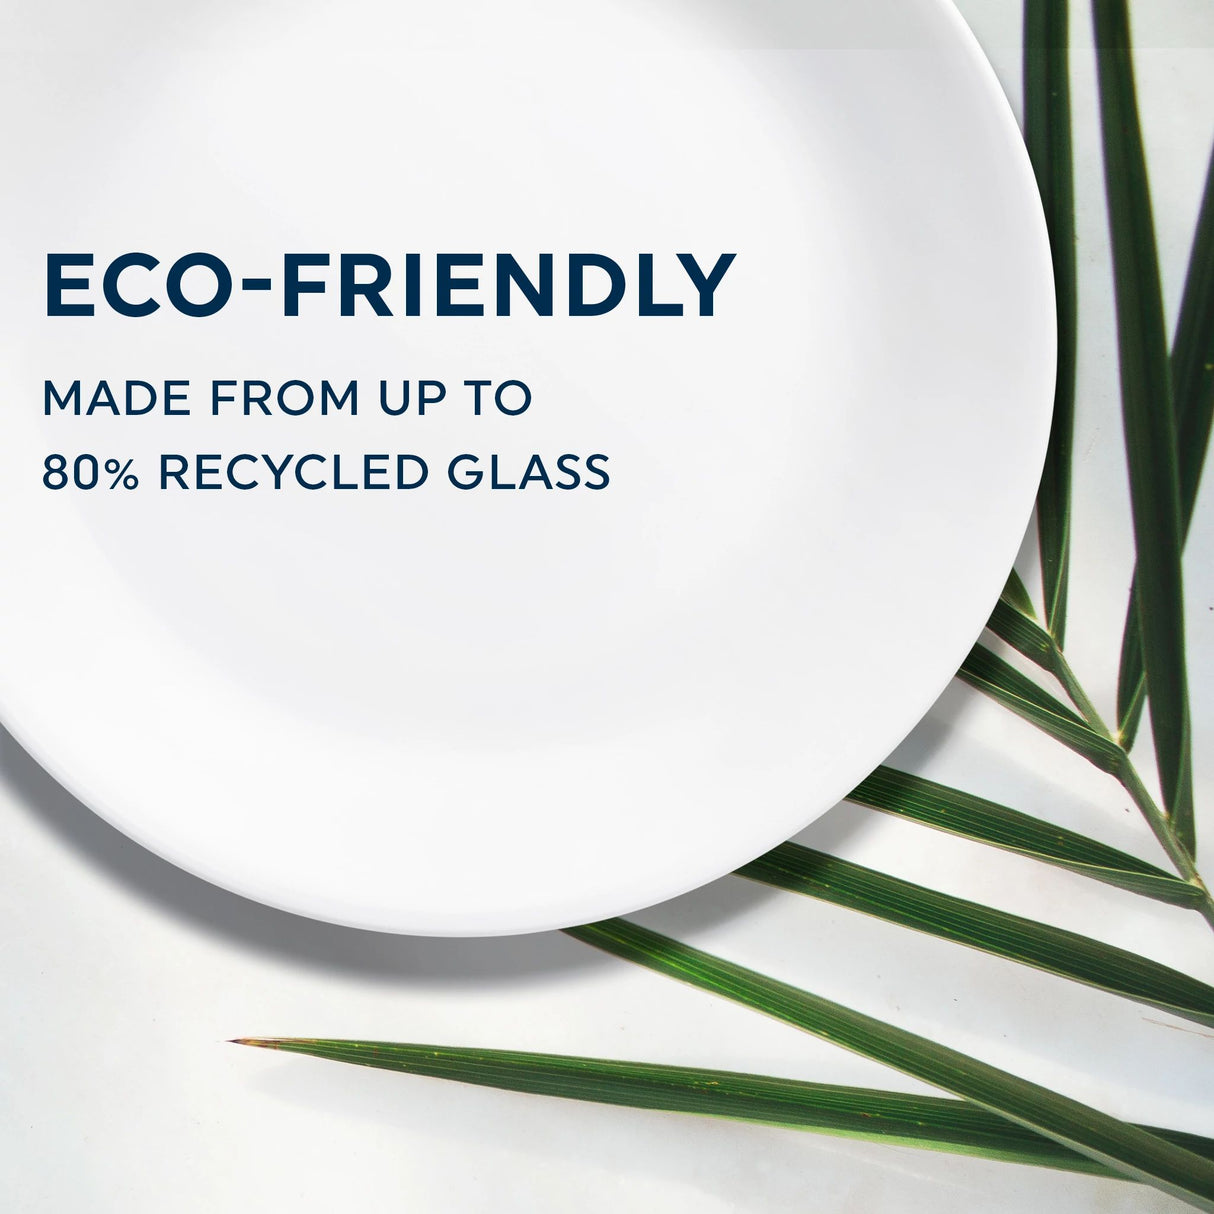  text that says eco-friendly